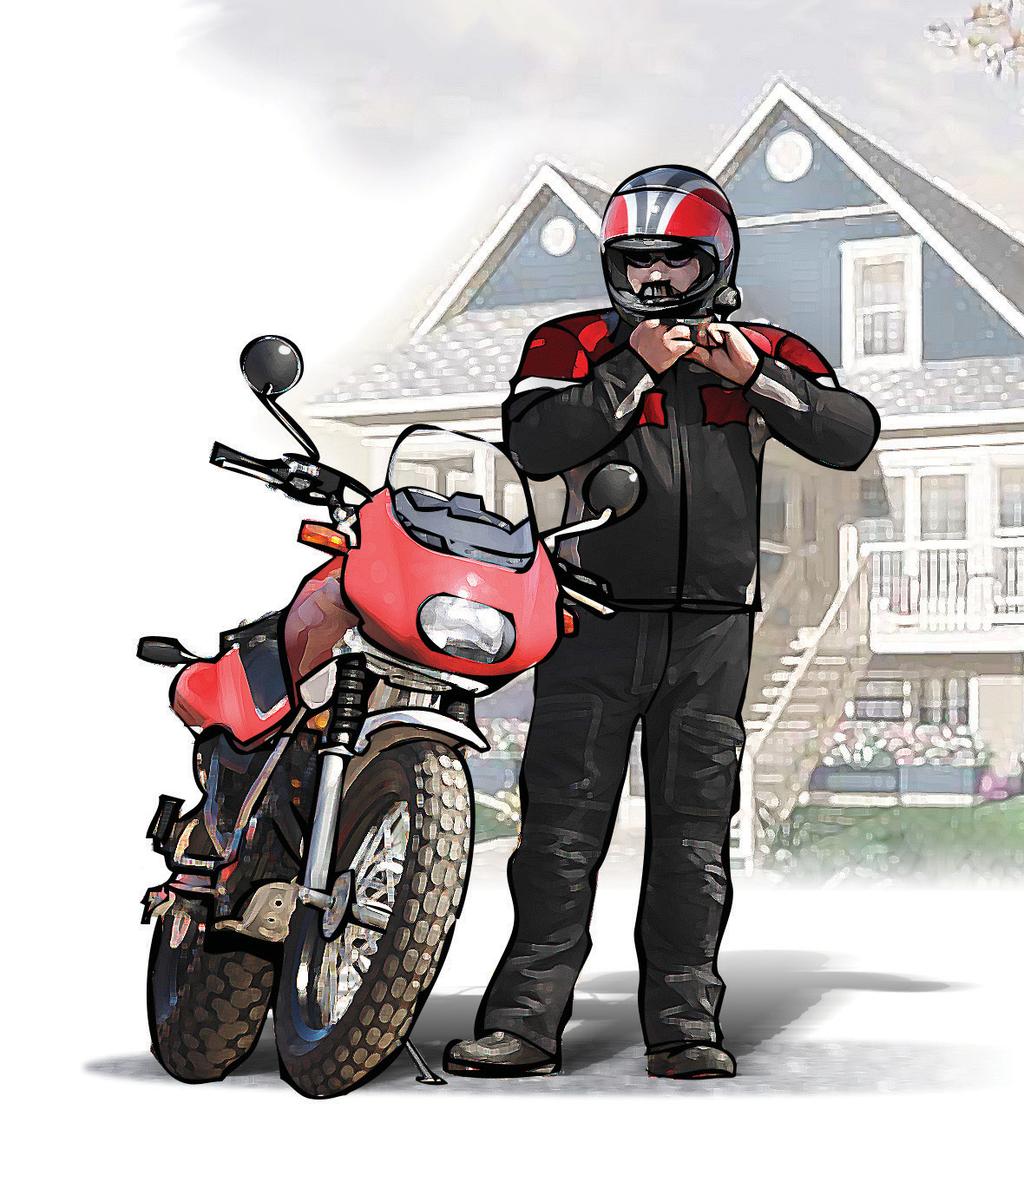 Rules for operating a motorcycle Requirements To drive a motorcycle you must: hold a valid licence of any class and stage pass a written or oral knowledge test obtain a Class 6M (Motorcycle Training